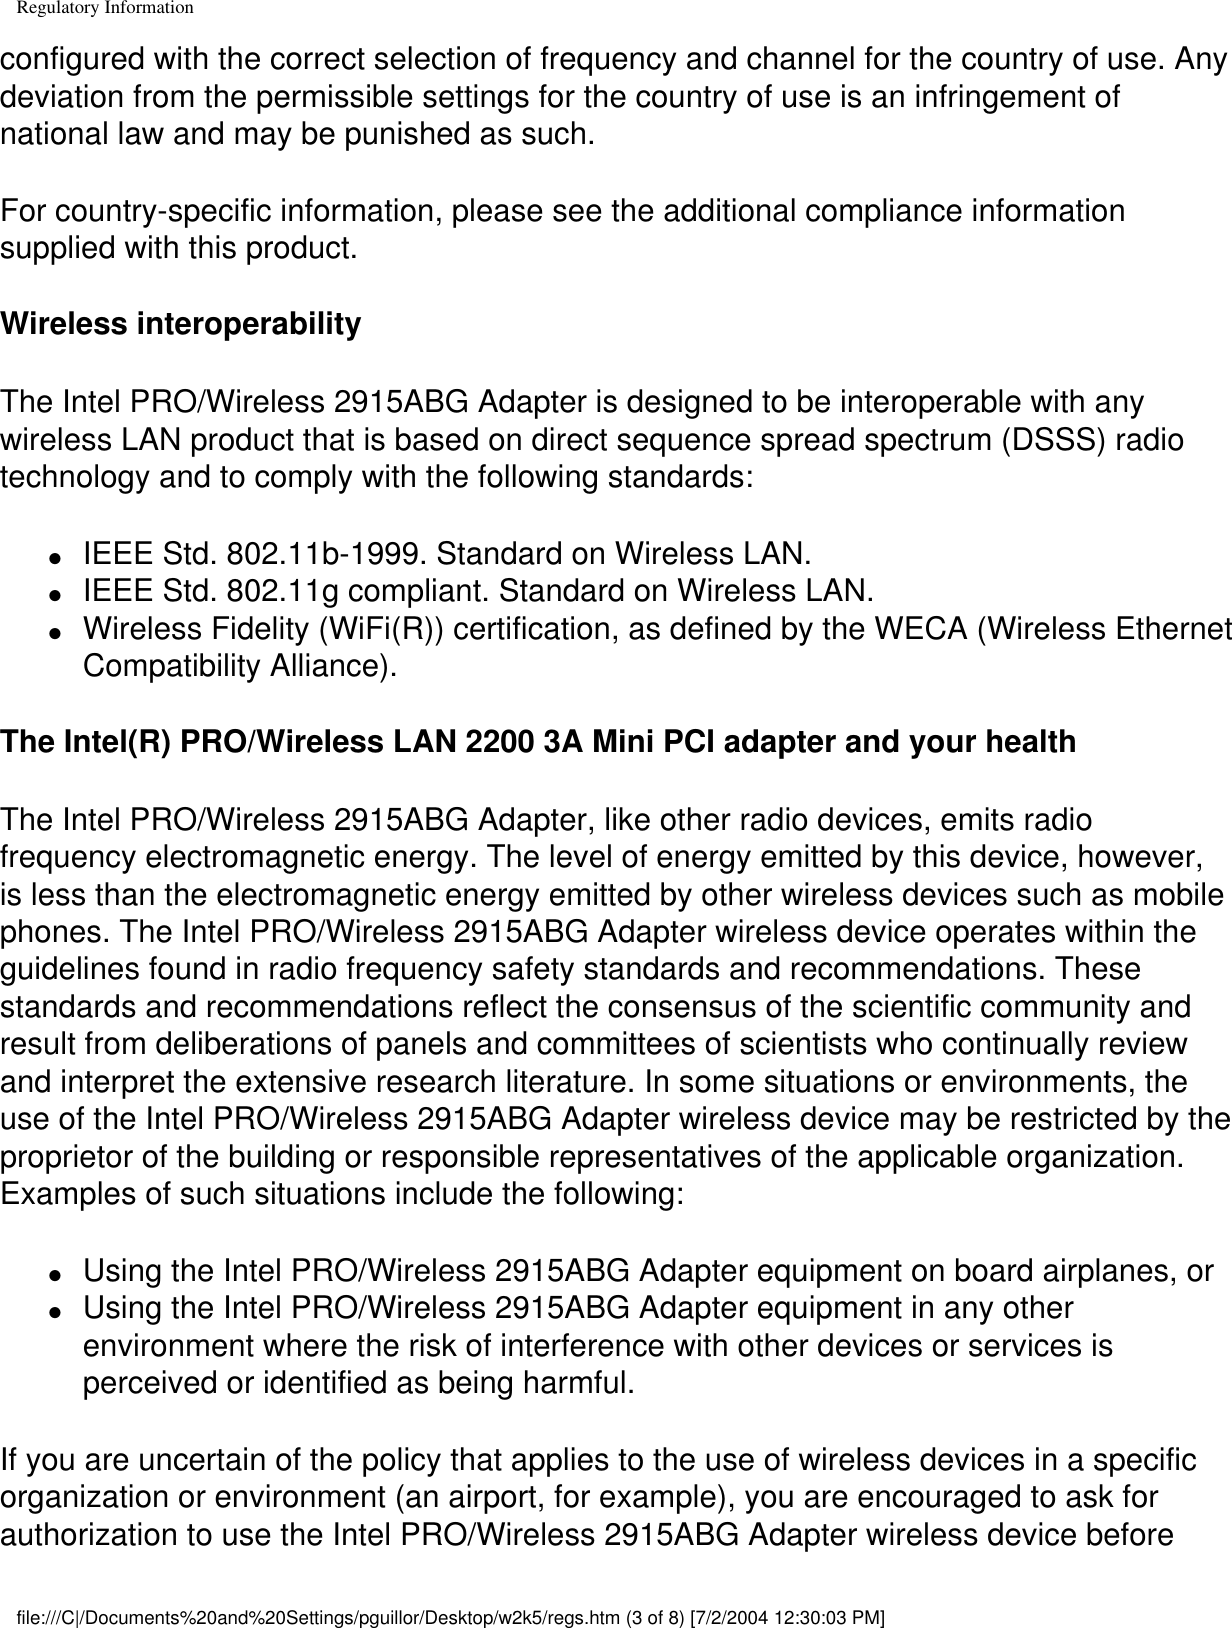 Regulatory Informationconfigured with the correct selection of frequency and channel for the country of use. Any deviation from the permissible settings for the country of use is an infringement of national law and may be punished as such.For country-specific information, please see the additional compliance information supplied with this product.Wireless interoperabilityThe Intel PRO/Wireless 2915ABG Adapter is designed to be interoperable with any wireless LAN product that is based on direct sequence spread spectrum (DSSS) radio technology and to comply with the following standards:●     IEEE Std. 802.11b-1999. Standard on Wireless LAN.●     IEEE Std. 802.11g compliant. Standard on Wireless LAN.●     Wireless Fidelity (WiFi(R)) certification, as defined by the WECA (Wireless Ethernet Compatibility Alliance).The Intel(R) PRO/Wireless LAN 2200 3A Mini PCI adapter and your healthThe Intel PRO/Wireless 2915ABG Adapter, like other radio devices, emits radio frequency electromagnetic energy. The level of energy emitted by this device, however, is less than the electromagnetic energy emitted by other wireless devices such as mobile phones. The Intel PRO/Wireless 2915ABG Adapter wireless device operates within the guidelines found in radio frequency safety standards and recommendations. These standards and recommendations reflect the consensus of the scientific community and result from deliberations of panels and committees of scientists who continually review and interpret the extensive research literature. In some situations or environments, the use of the Intel PRO/Wireless 2915ABG Adapter wireless device may be restricted by the proprietor of the building or responsible representatives of the applicable organization. Examples of such situations include the following:●     Using the Intel PRO/Wireless 2915ABG Adapter equipment on board airplanes, or●     Using the Intel PRO/Wireless 2915ABG Adapter equipment in any other environment where the risk of interference with other devices or services is perceived or identified as being harmful.If you are uncertain of the policy that applies to the use of wireless devices in a specific organization or environment (an airport, for example), you are encouraged to ask for authorization to use the Intel PRO/Wireless 2915ABG Adapter wireless device before file:///C|/Documents%20and%20Settings/pguillor/Desktop/w2k5/regs.htm (3 of 8) [7/2/2004 12:30:03 PM]